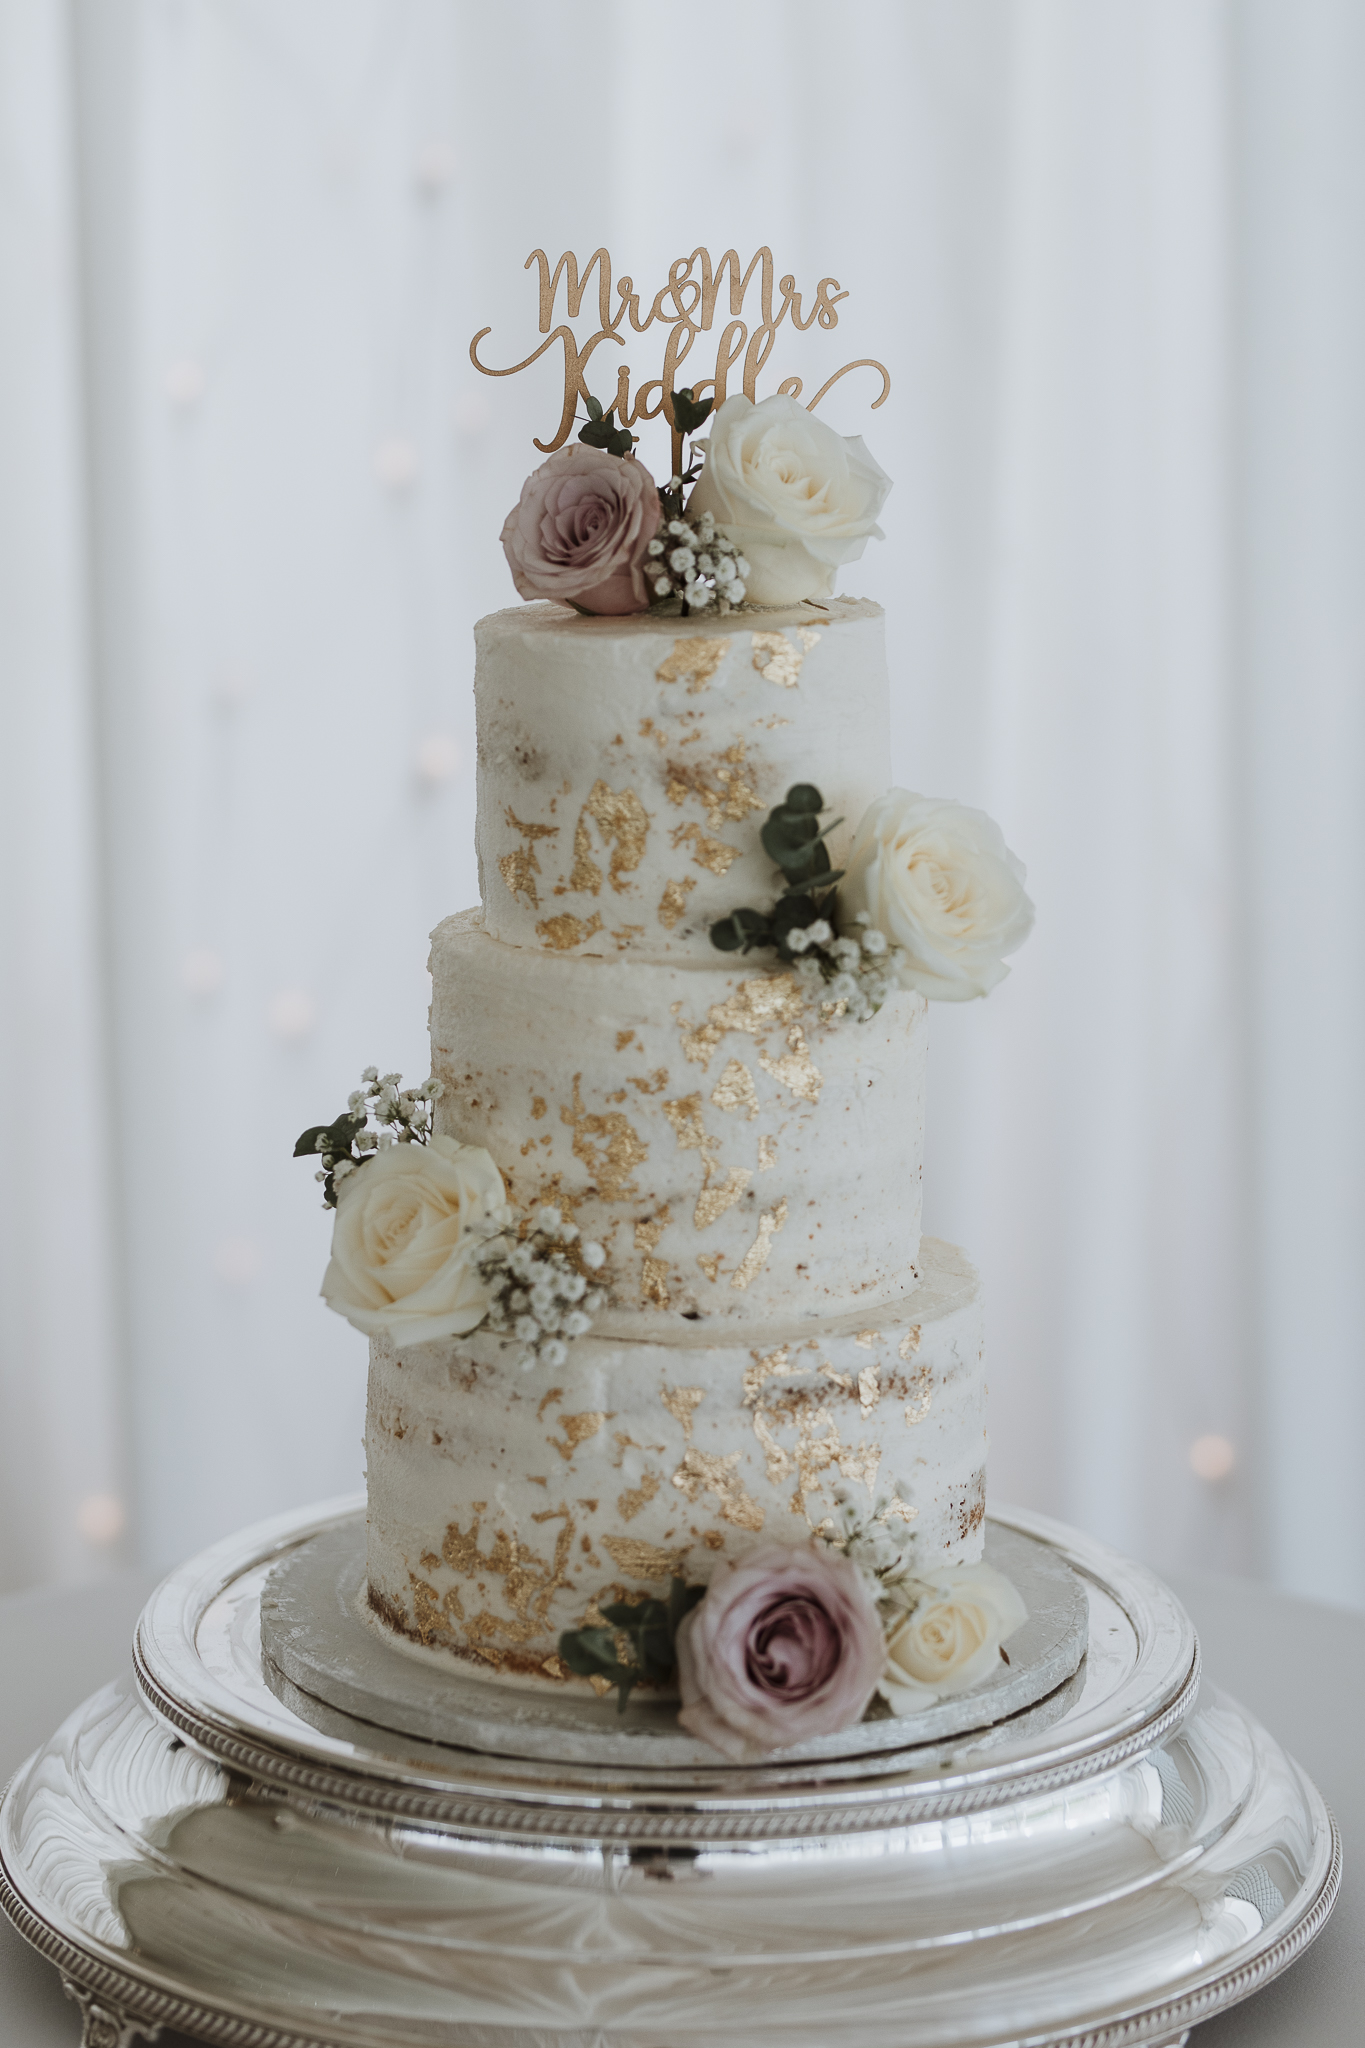 Gluten and dairy free wedding cake by Cake Design by Becky